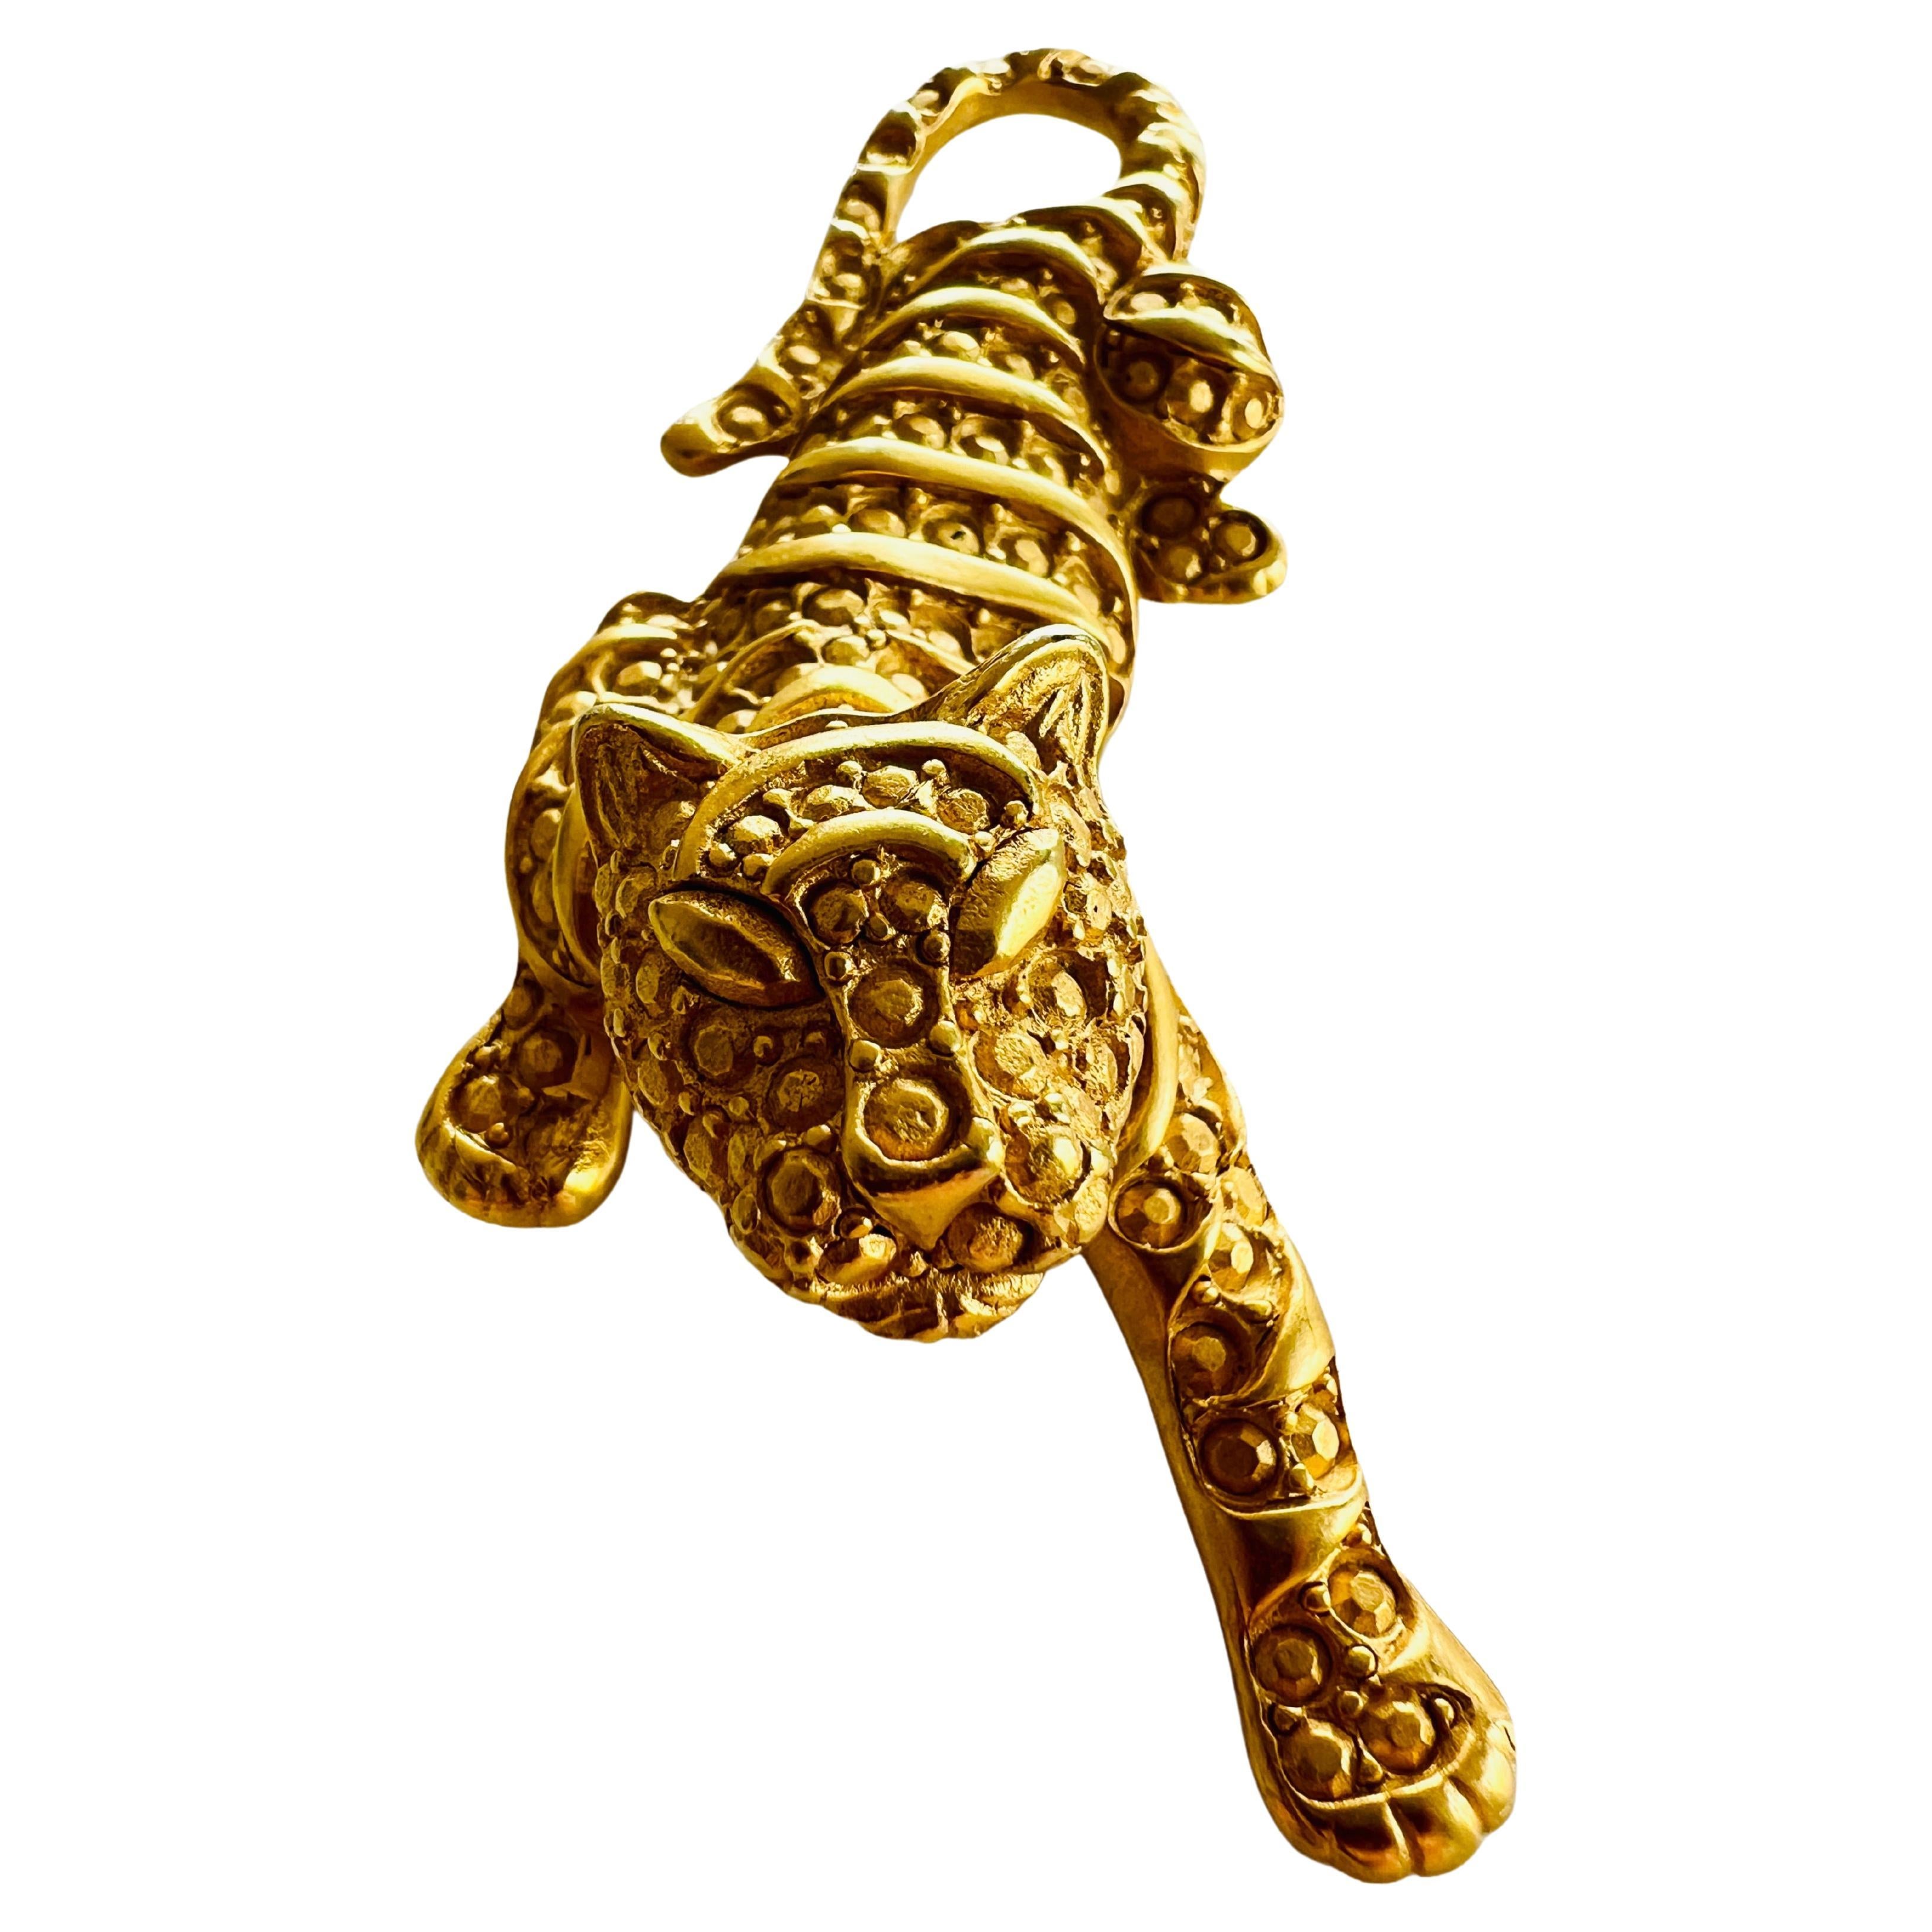 This striking large gold tiger brooch is a statement piece in its own right. It boasts an exceptional, textured, three-dimensional metal design that cleverly mimics the appearance of rhinestones. This approach achieves a refined elegance, offering a